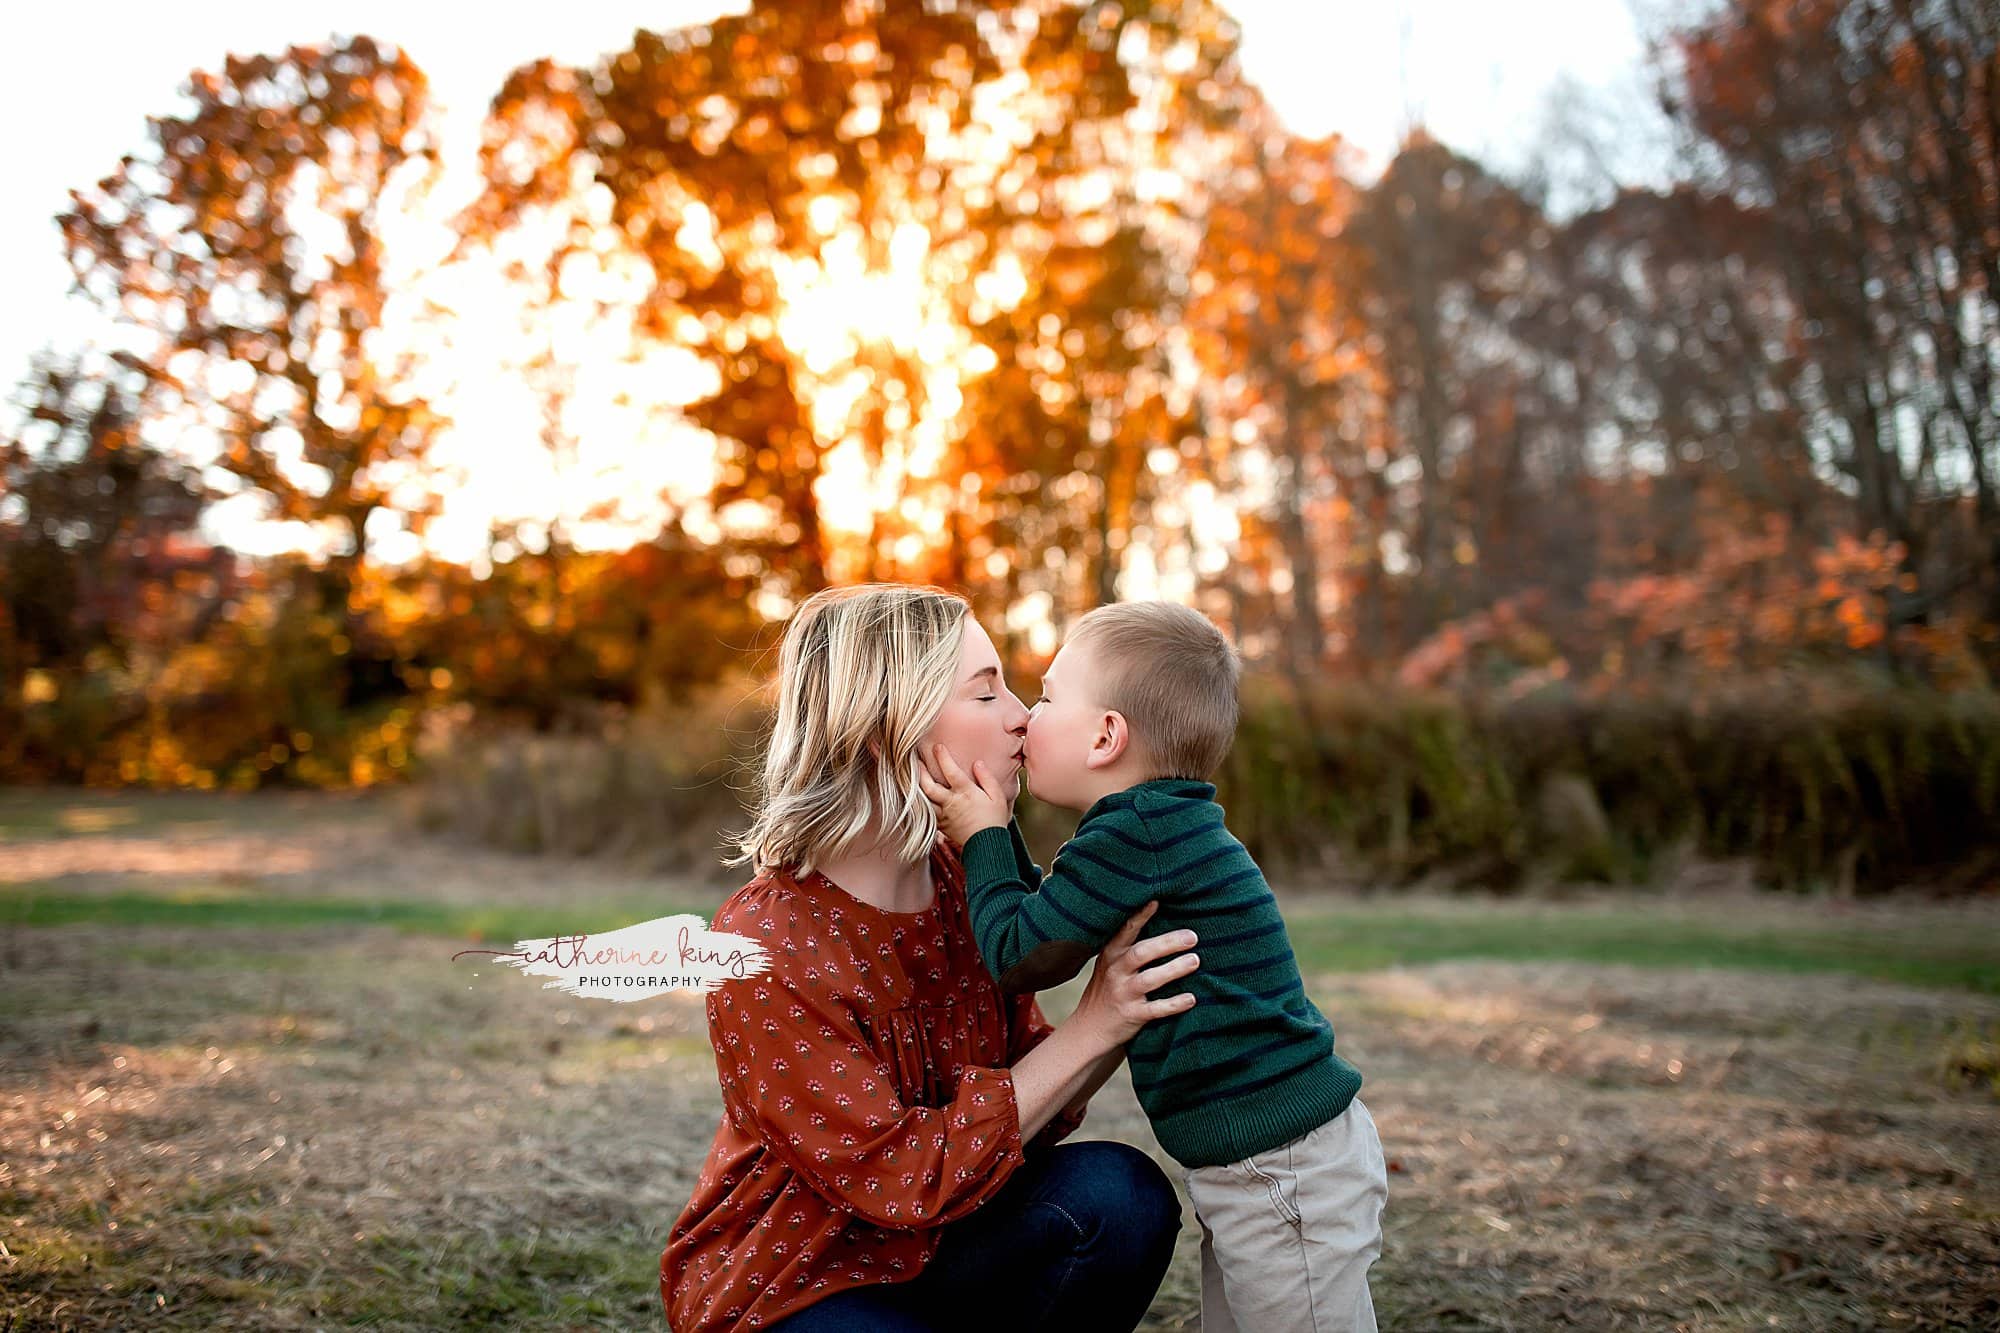 Wrapping up the Fall photography season | CT Family Photographer